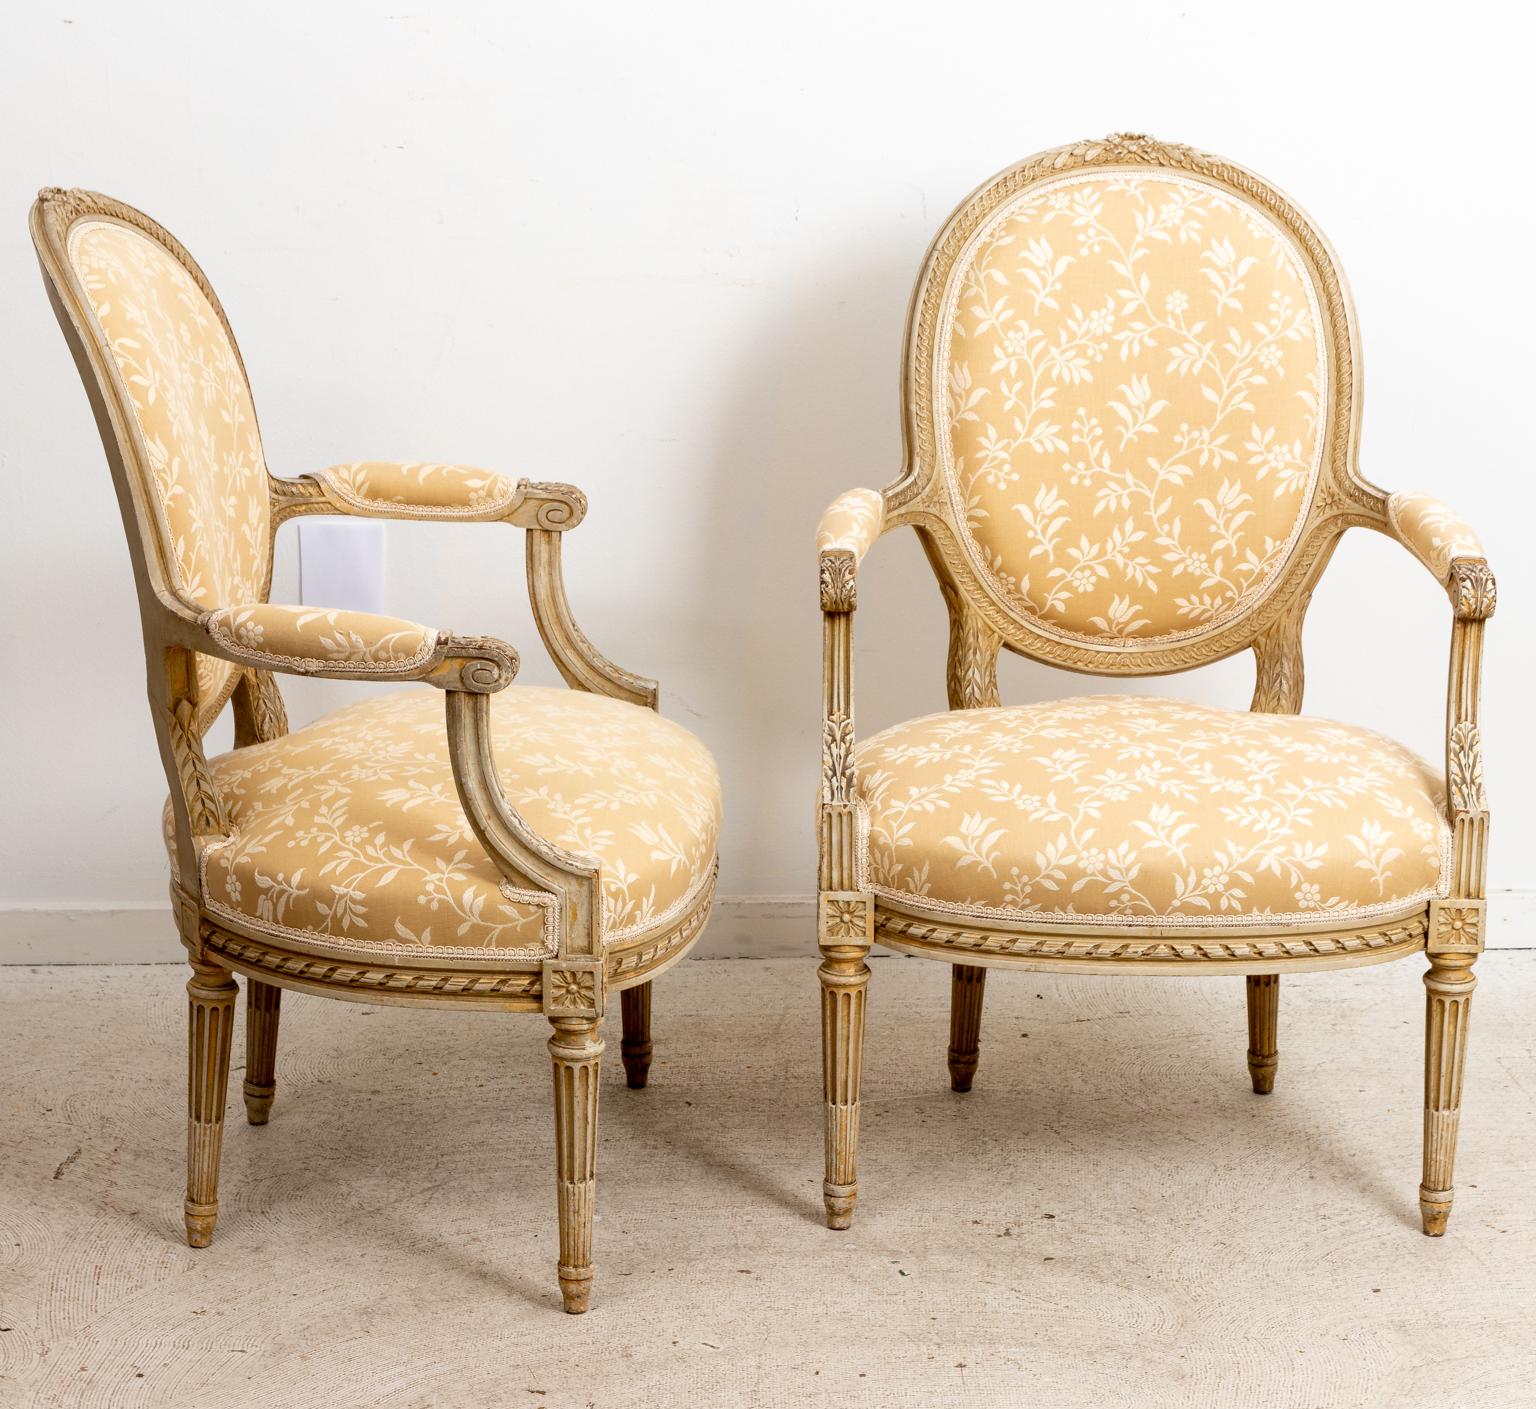 Upholstery Pair of French Bergere Chairs